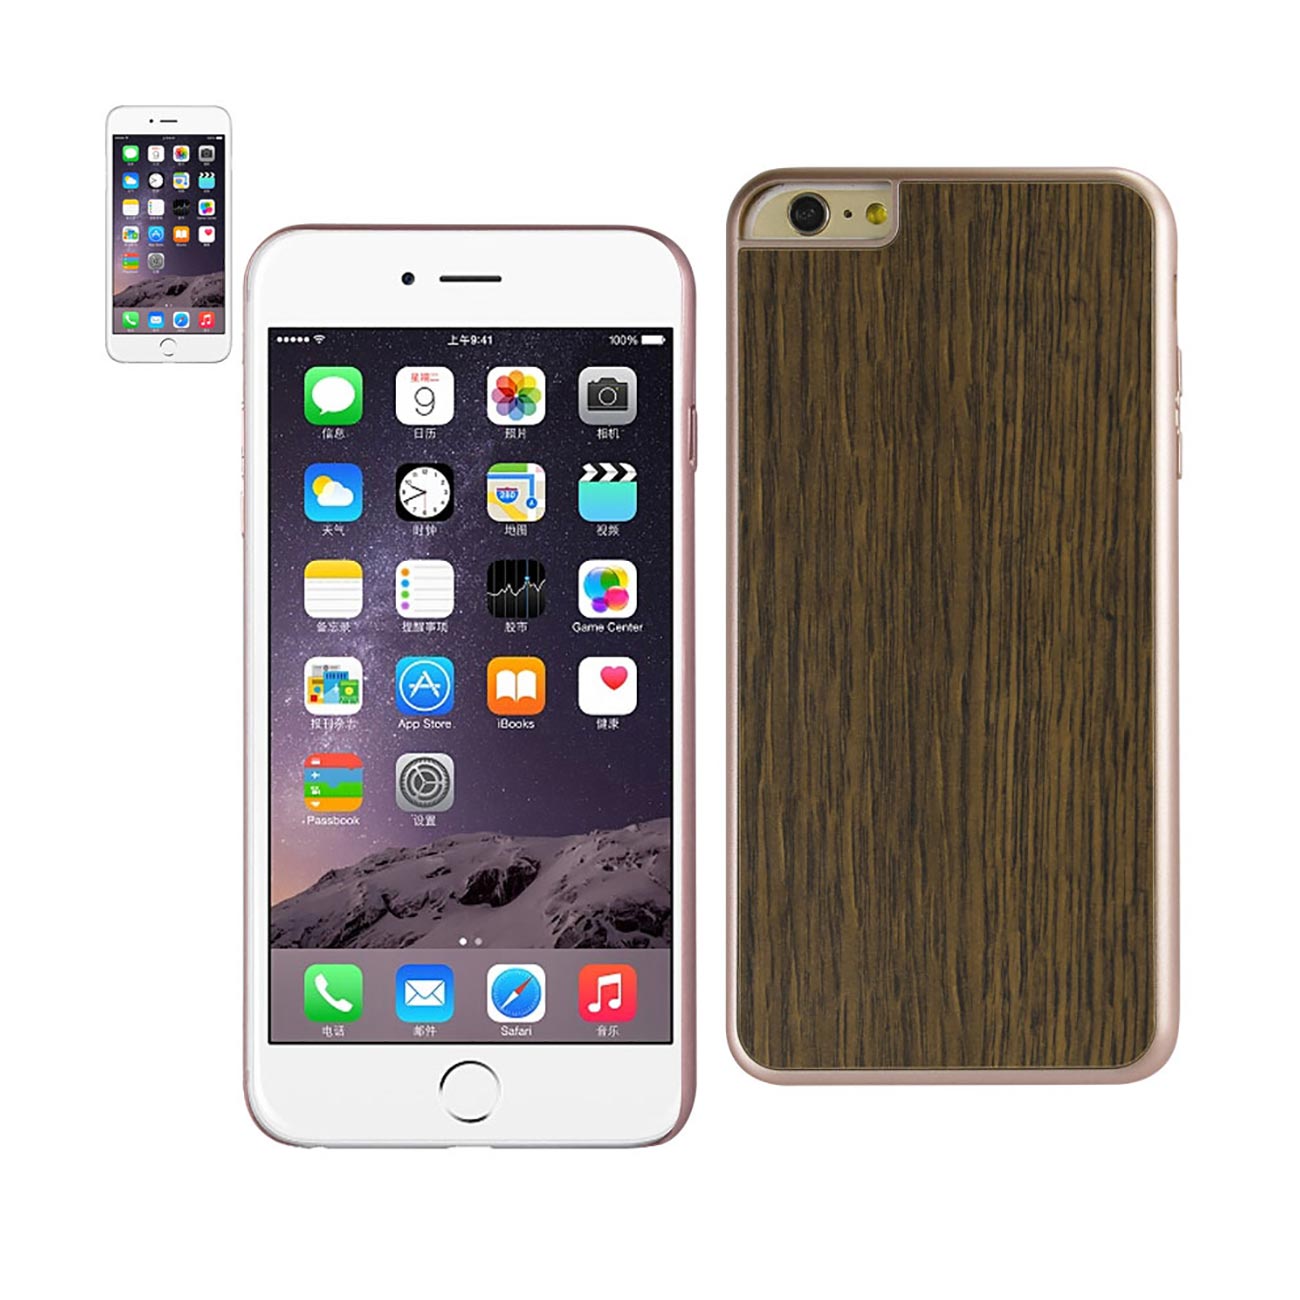 Case Wood Grain Slim Snap On iPhone 6 Plus Red Gold Color